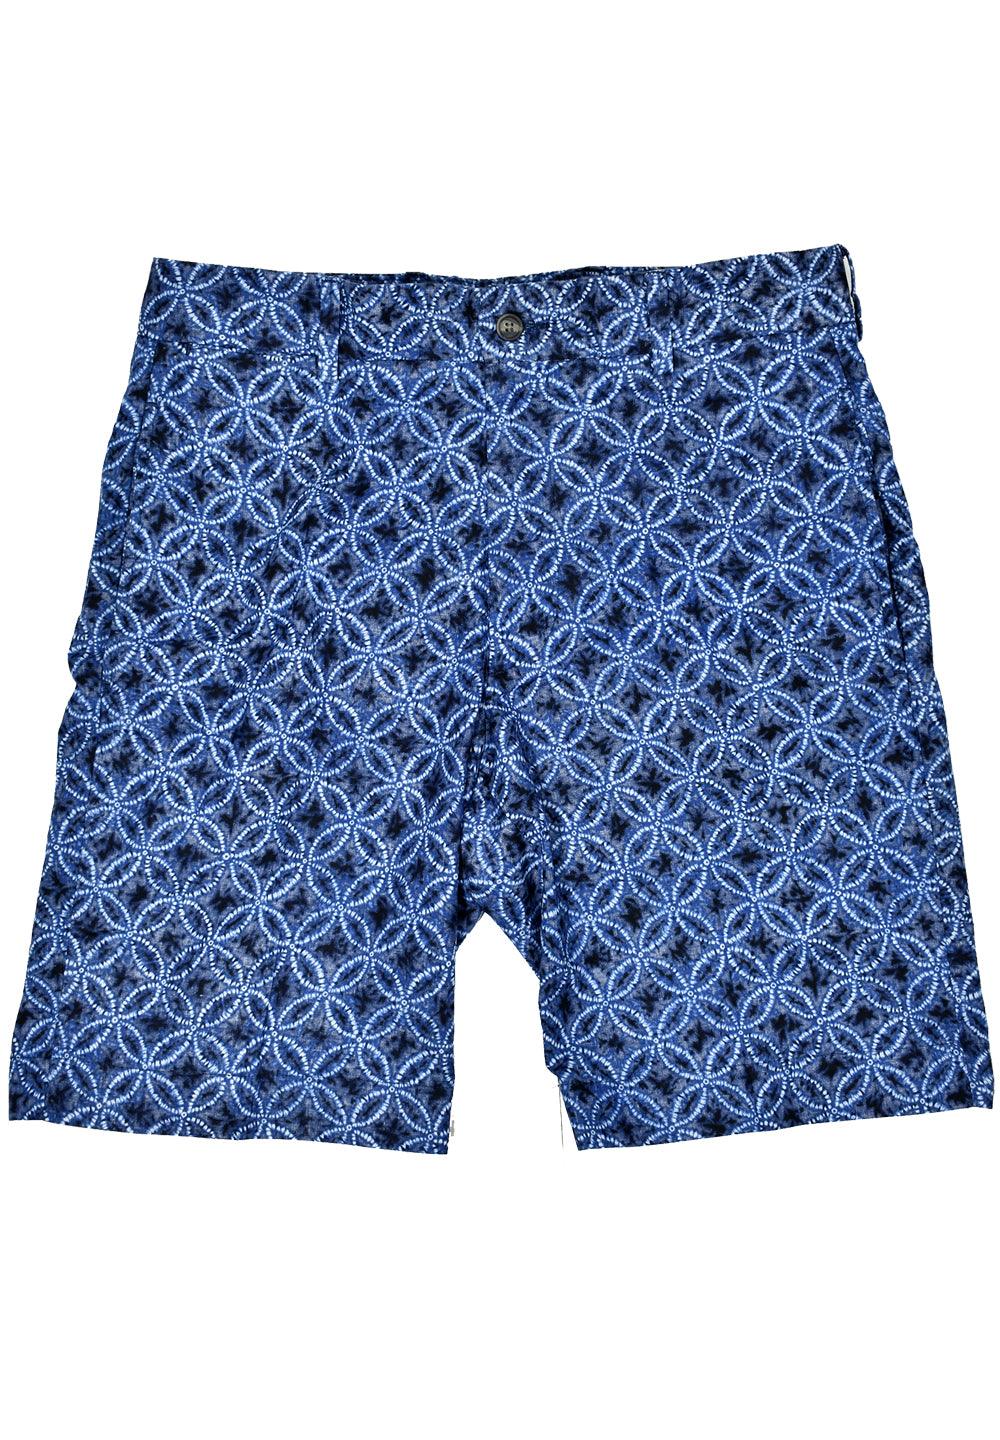 This printed, hybrid walk short is great to show your style while strolling along the beach shops and is even better when you can head right to the water.  Classic short model, printed cotton microfiber fabric is soft and lightweight.  2 classic front slash pockets. Cool style works perfect with colored tees. Length is just above the knees. Classic fit.